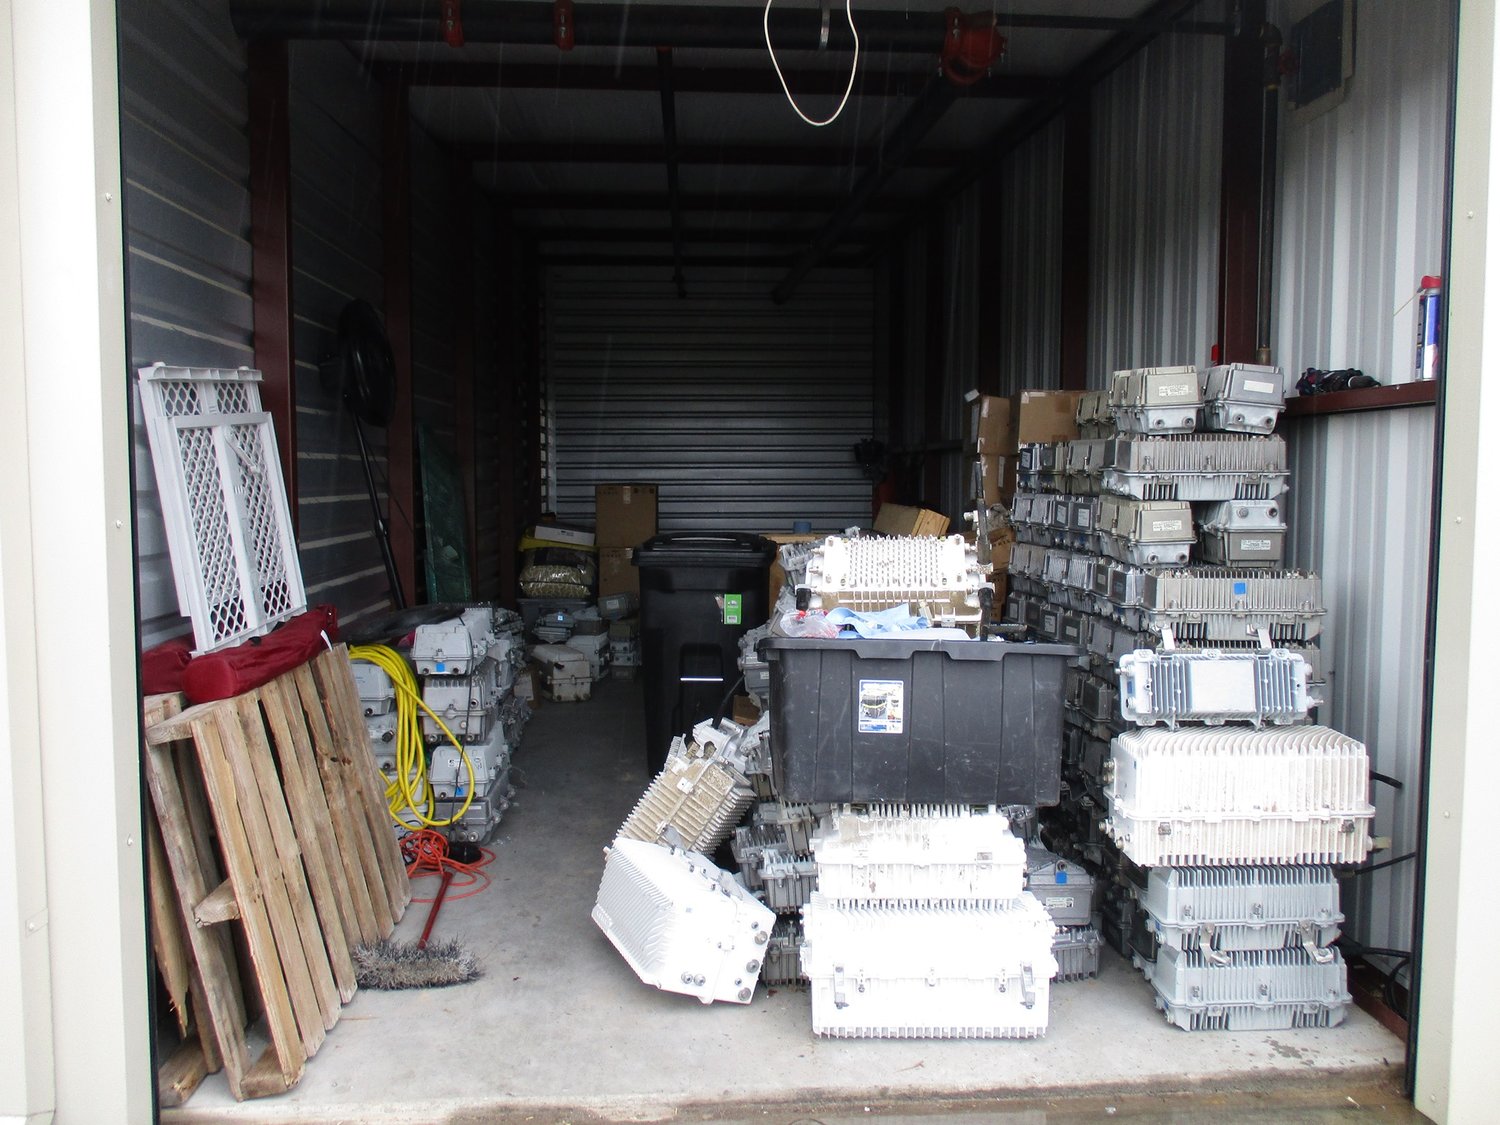 Upon executing a search warrant on July 9, deputies found this storage unit stacked with hundreds of thousands of dollars worth of internet nodes.